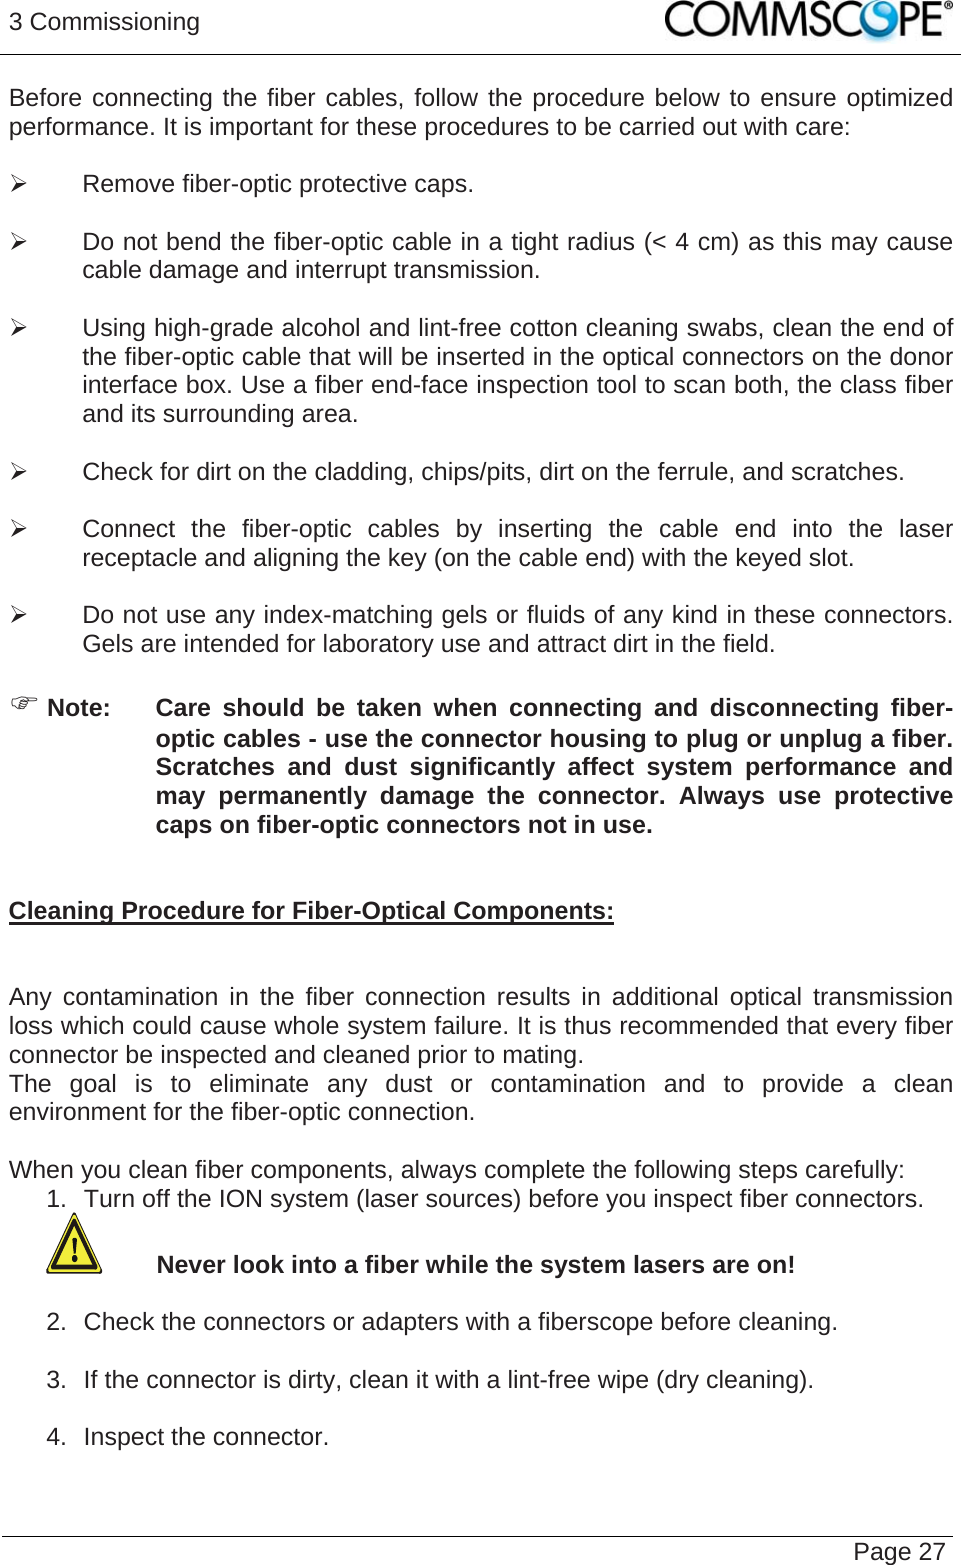 3 Commissioning   Page 27Before connecting the fiber cables, follow the procedure below to ensure optimized performance. It is important for these procedures to be carried out with care:  ¾  Remove fiber-optic protective caps.  ¾  Do not bend the fiber-optic cable in a tight radius (&lt; 4 cm) as this may cause cable damage and interrupt transmission.  ¾  Using high-grade alcohol and lint-free cotton cleaning swabs, clean the end of the fiber-optic cable that will be inserted in the optical connectors on the donor interface box. Use a fiber end-face inspection tool to scan both, the class fiber and its surrounding area.   ¾  Check for dirt on the cladding, chips/pits, dirt on the ferrule, and scratches.  ¾  Connect the fiber-optic cables by inserting the cable end into the laser receptacle and aligning the key (on the cable end) with the keyed slot.  ¾  Do not use any index-matching gels or fluids of any kind in these connectors. Gels are intended for laboratory use and attract dirt in the field.  ) Note:  Care should be taken when connecting and disconnecting fiber-optic cables - use the connector housing to plug or unplug a fiber. Scratches and dust significantly affect system performance and may permanently damage the connector. Always use protective caps on fiber-optic connectors not in use.   Cleaning Procedure for Fiber-Optical Components:   Any contamination in the fiber connection results in additional optical transmission loss which could cause whole system failure. It is thus recommended that every fiber connector be inspected and cleaned prior to mating. The goal is to eliminate any dust or contamination and to provide a clean environment for the fiber-optic connection.   When you clean fiber components, always complete the following steps carefully: 1.  Turn off the ION system (laser sources) before you inspect fiber connectors.  Never look into a fiber while the system lasers are on!  2.  Check the connectors or adapters with a fiberscope before cleaning.  3.  If the connector is dirty, clean it with a lint-free wipe (dry cleaning).  4.  Inspect the connector.  